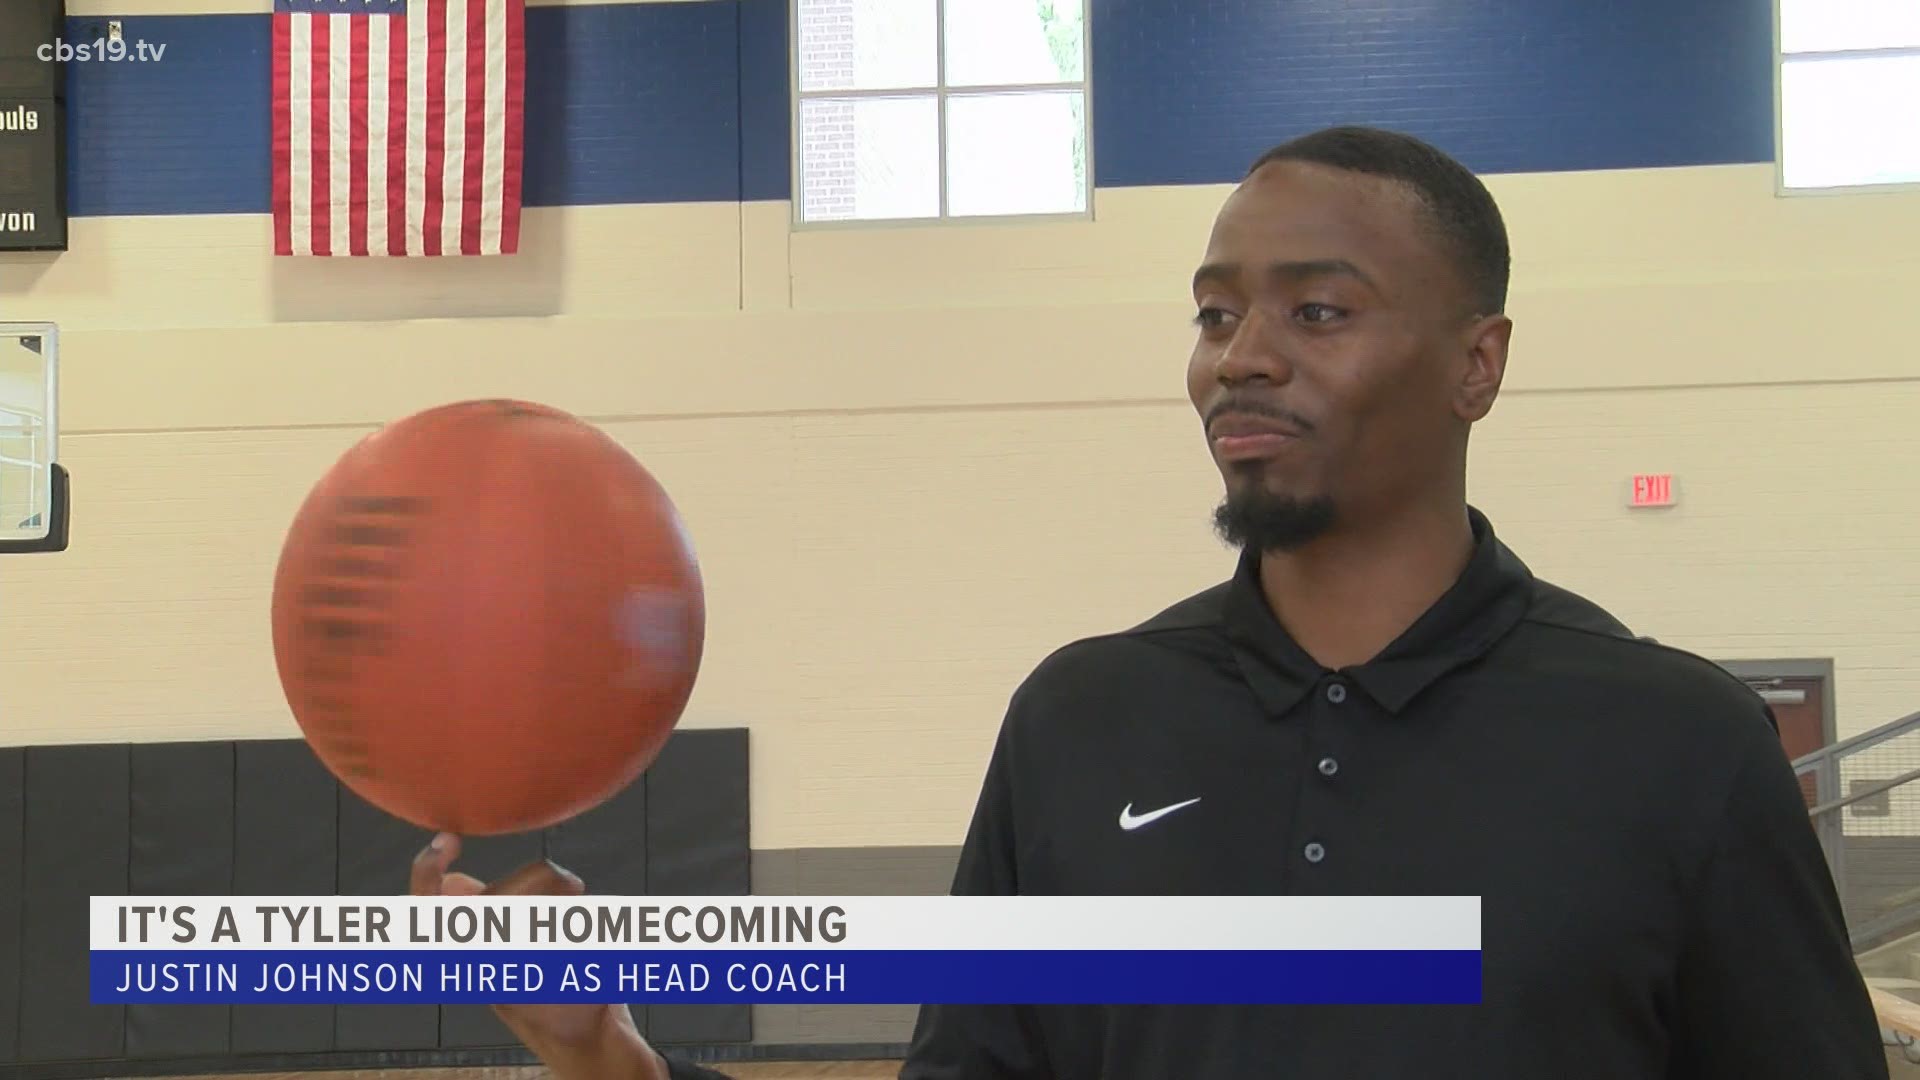 Johnson returns home to be the next Head Coach of Tyler High hoops.